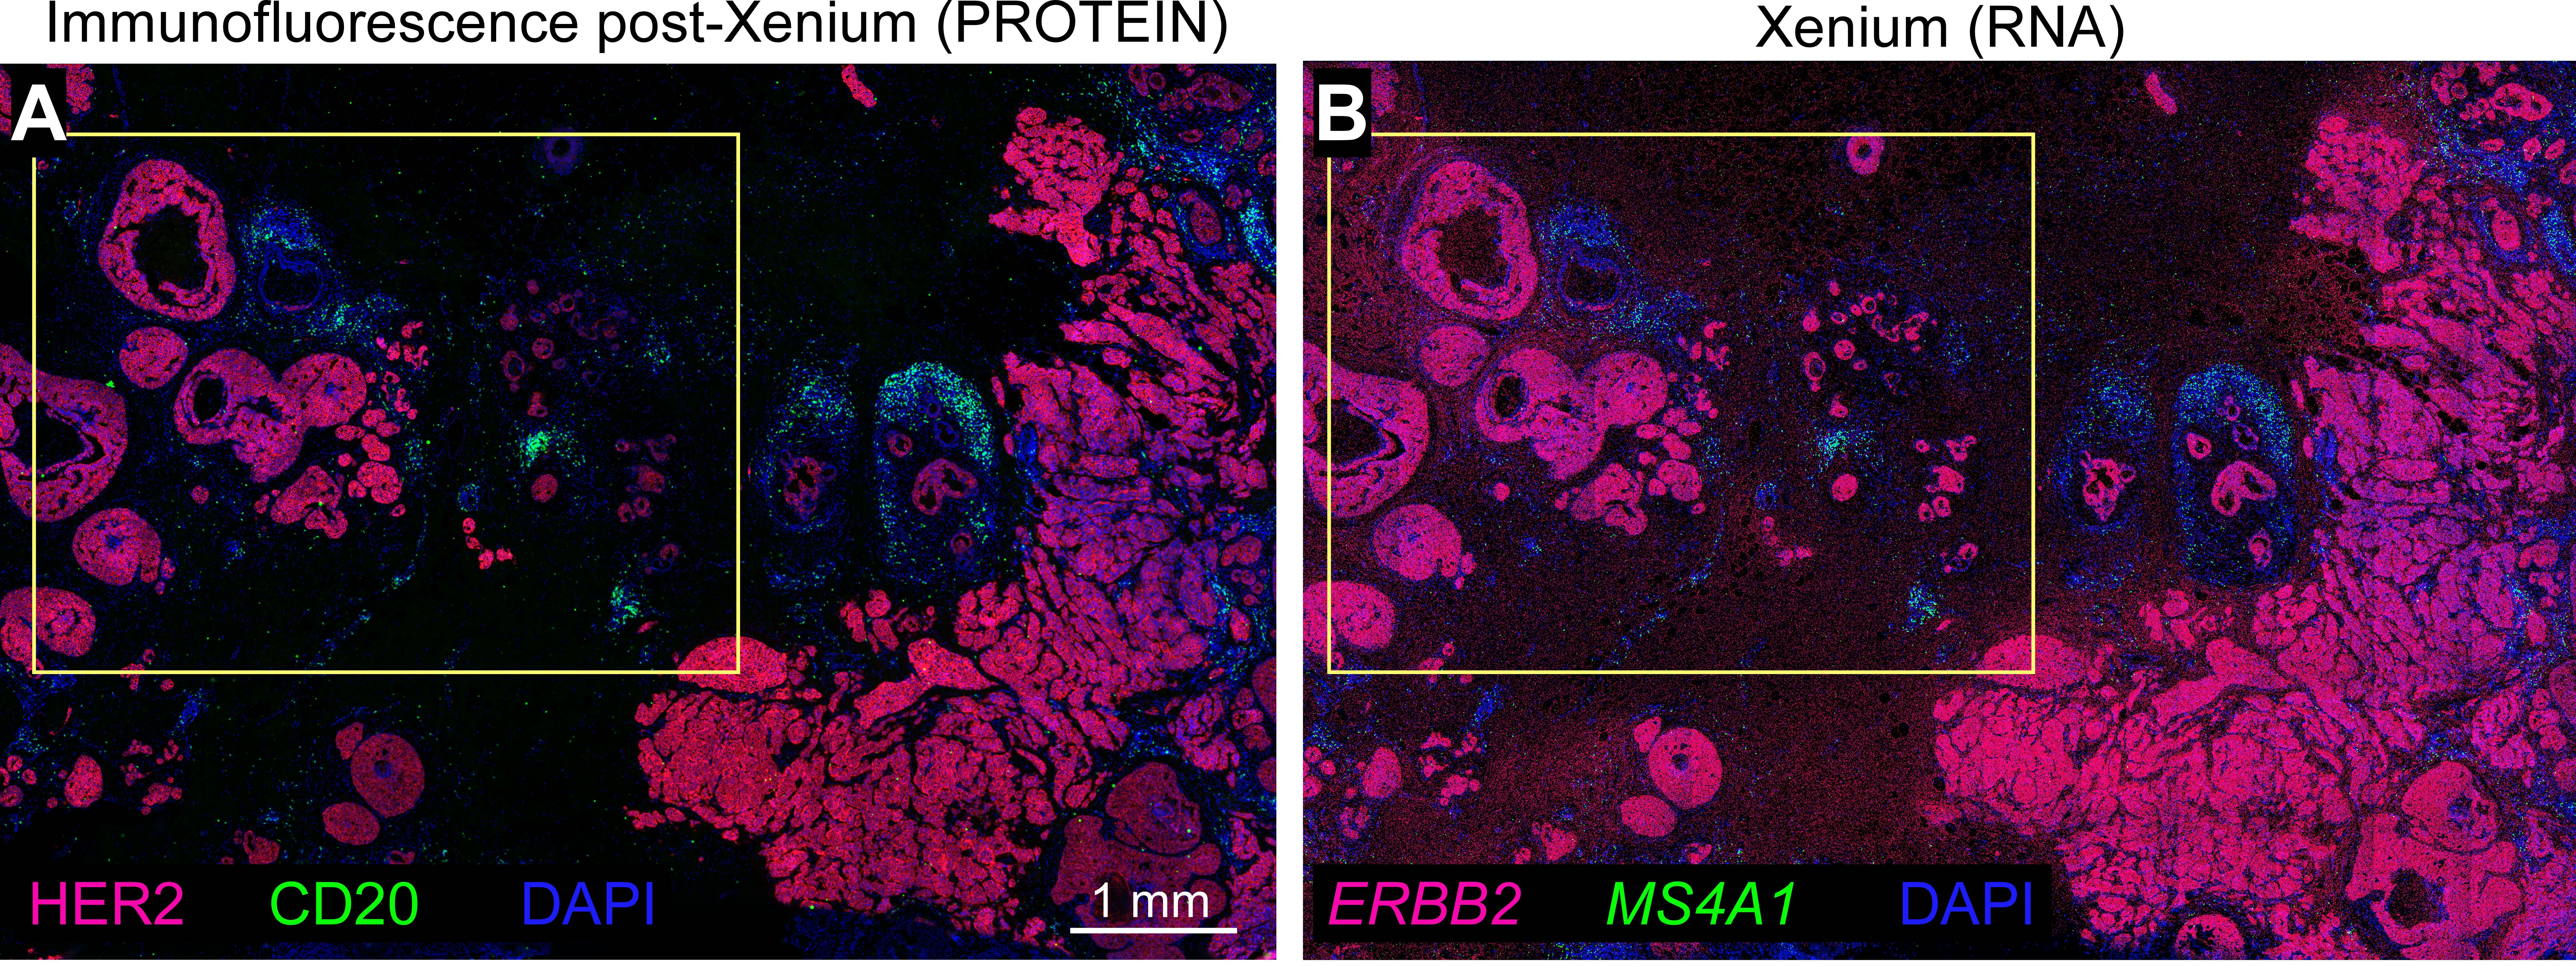 Figure 4. Protein immunofluorescence staining performed on the same tissue section following the Xenium run indicated spatial expression of HER2 (a tumor marker) and CD20 (a B-cell marker) protein was highly correlated with expression of the ERBB2 (HER2) and MSRA1 (CD20) RNA transcripts. Image credit: Janesick A, et al. bioRxiv (2022).